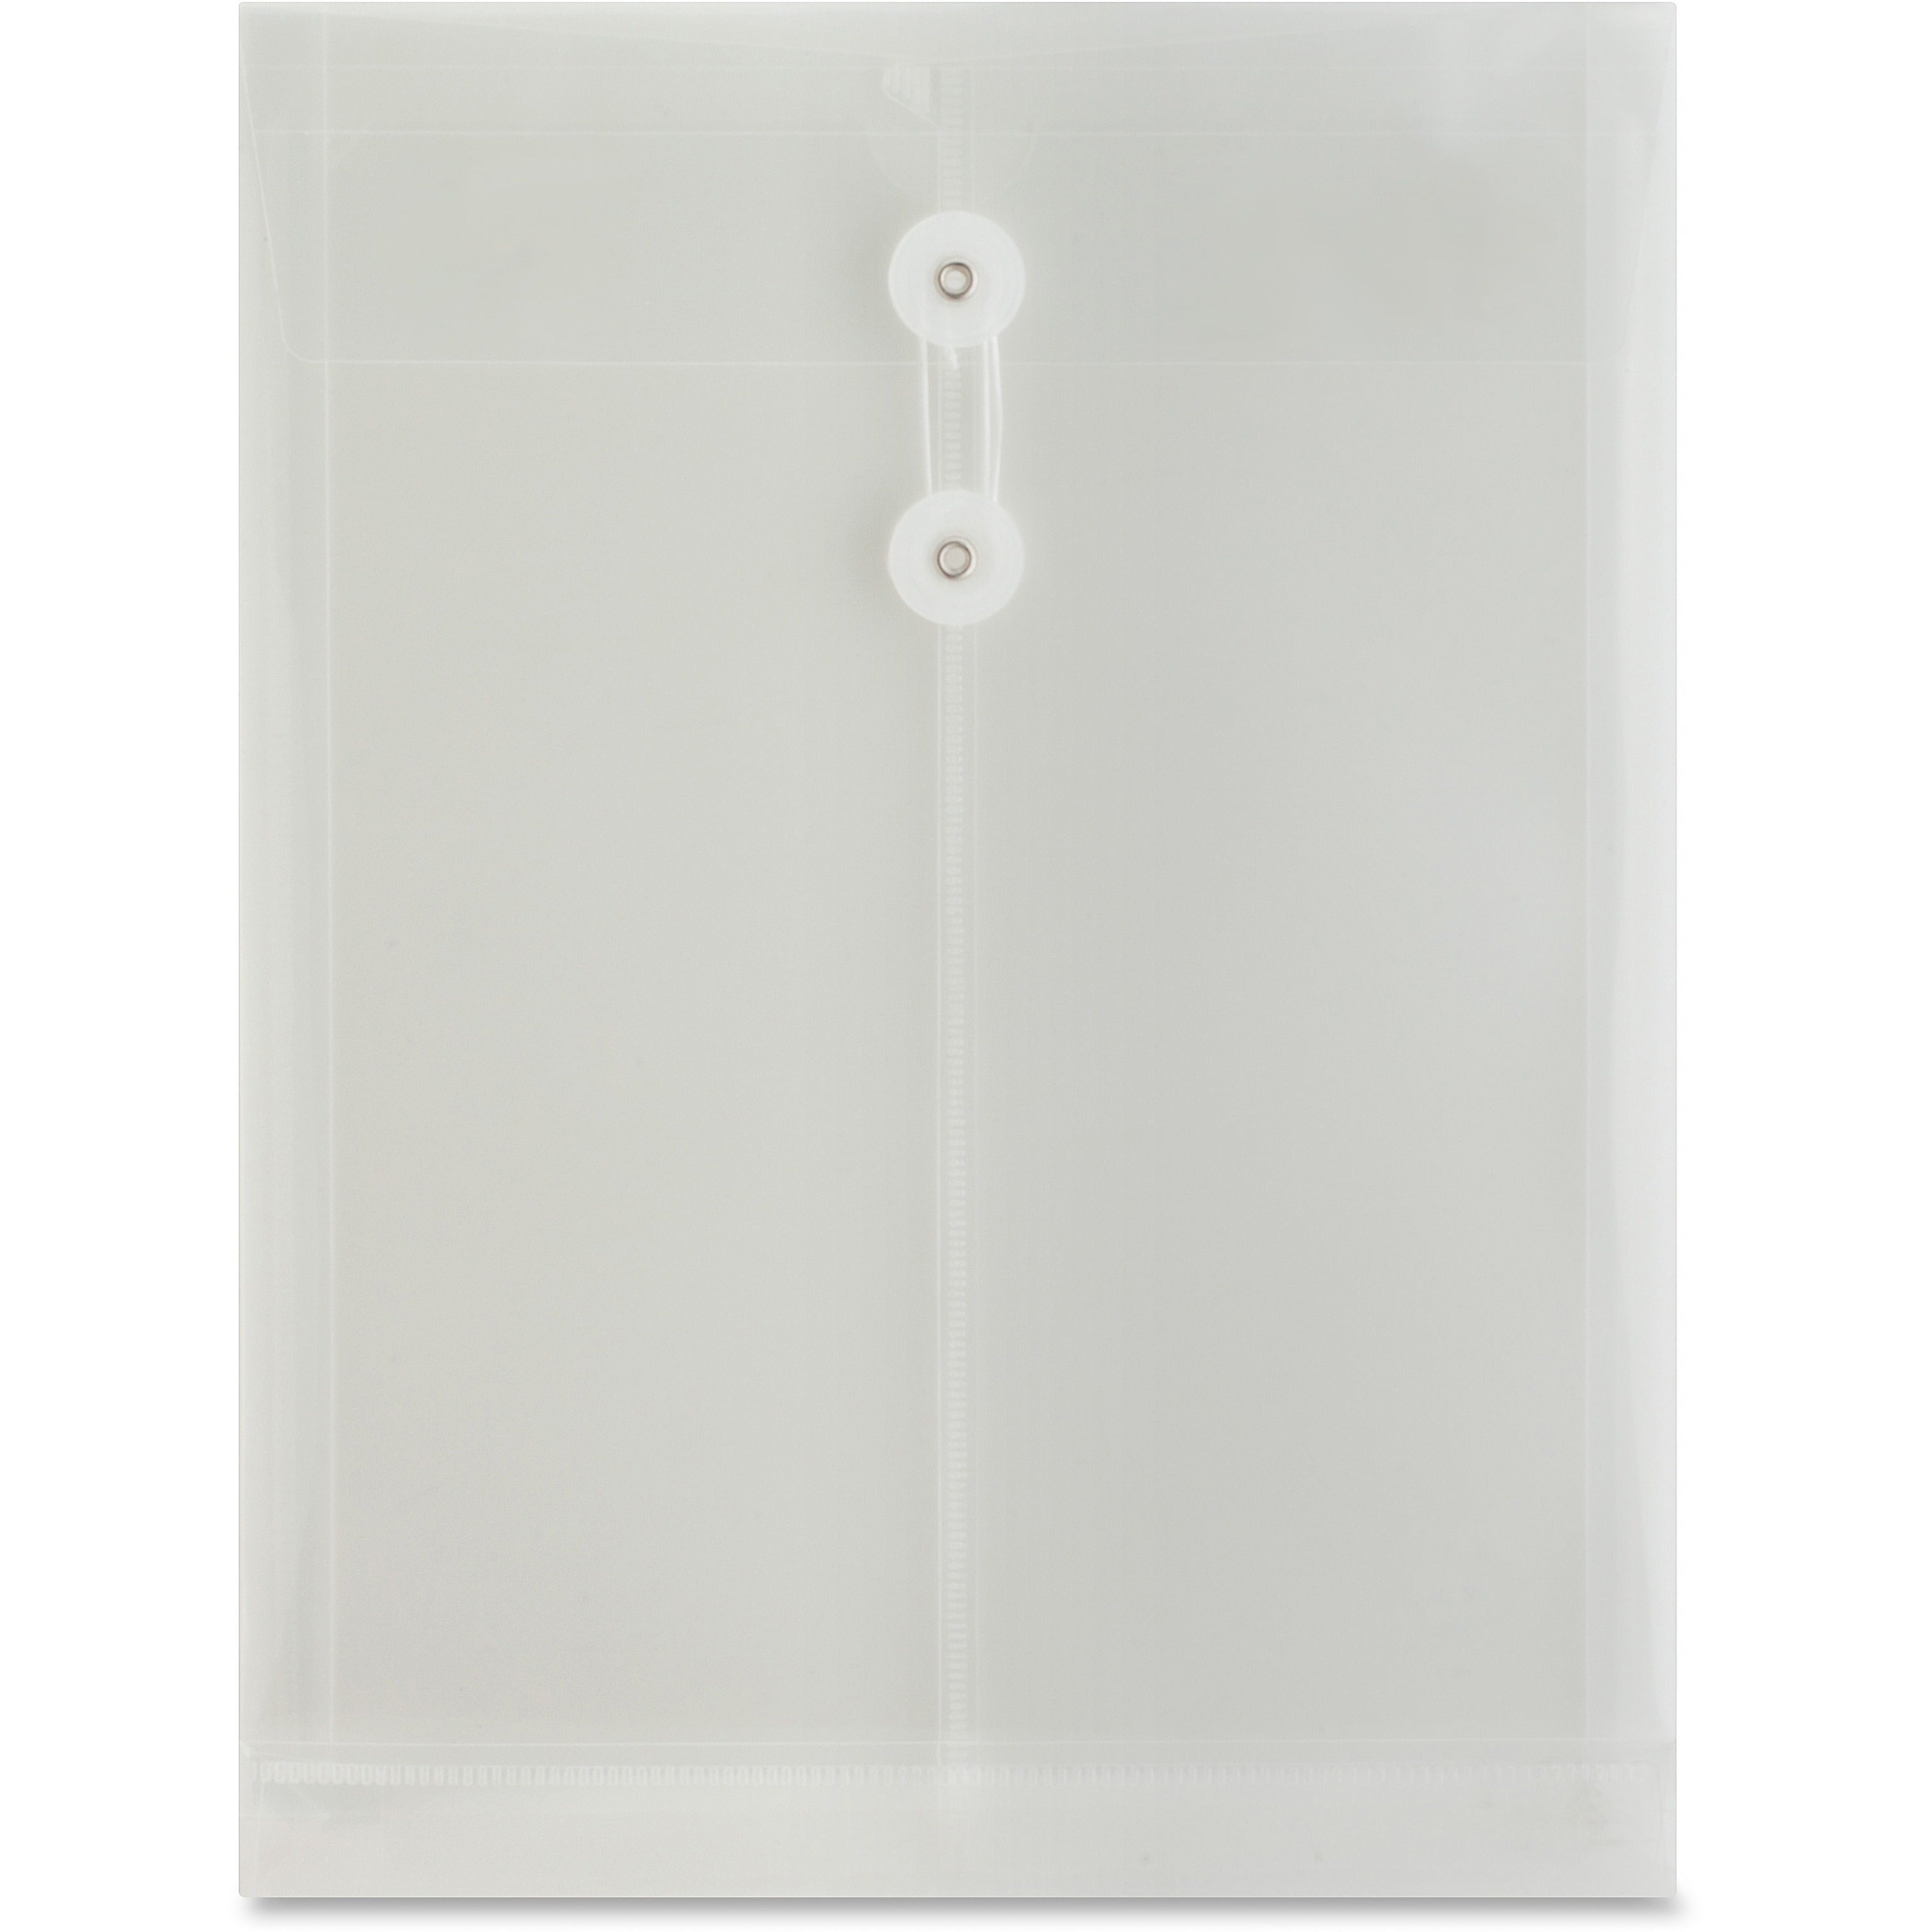 business-source-string-closure-top-open-poly-envelope-inter-department-10-width-x-13-length-string-button-1-each-clear_bsn02020 - 1